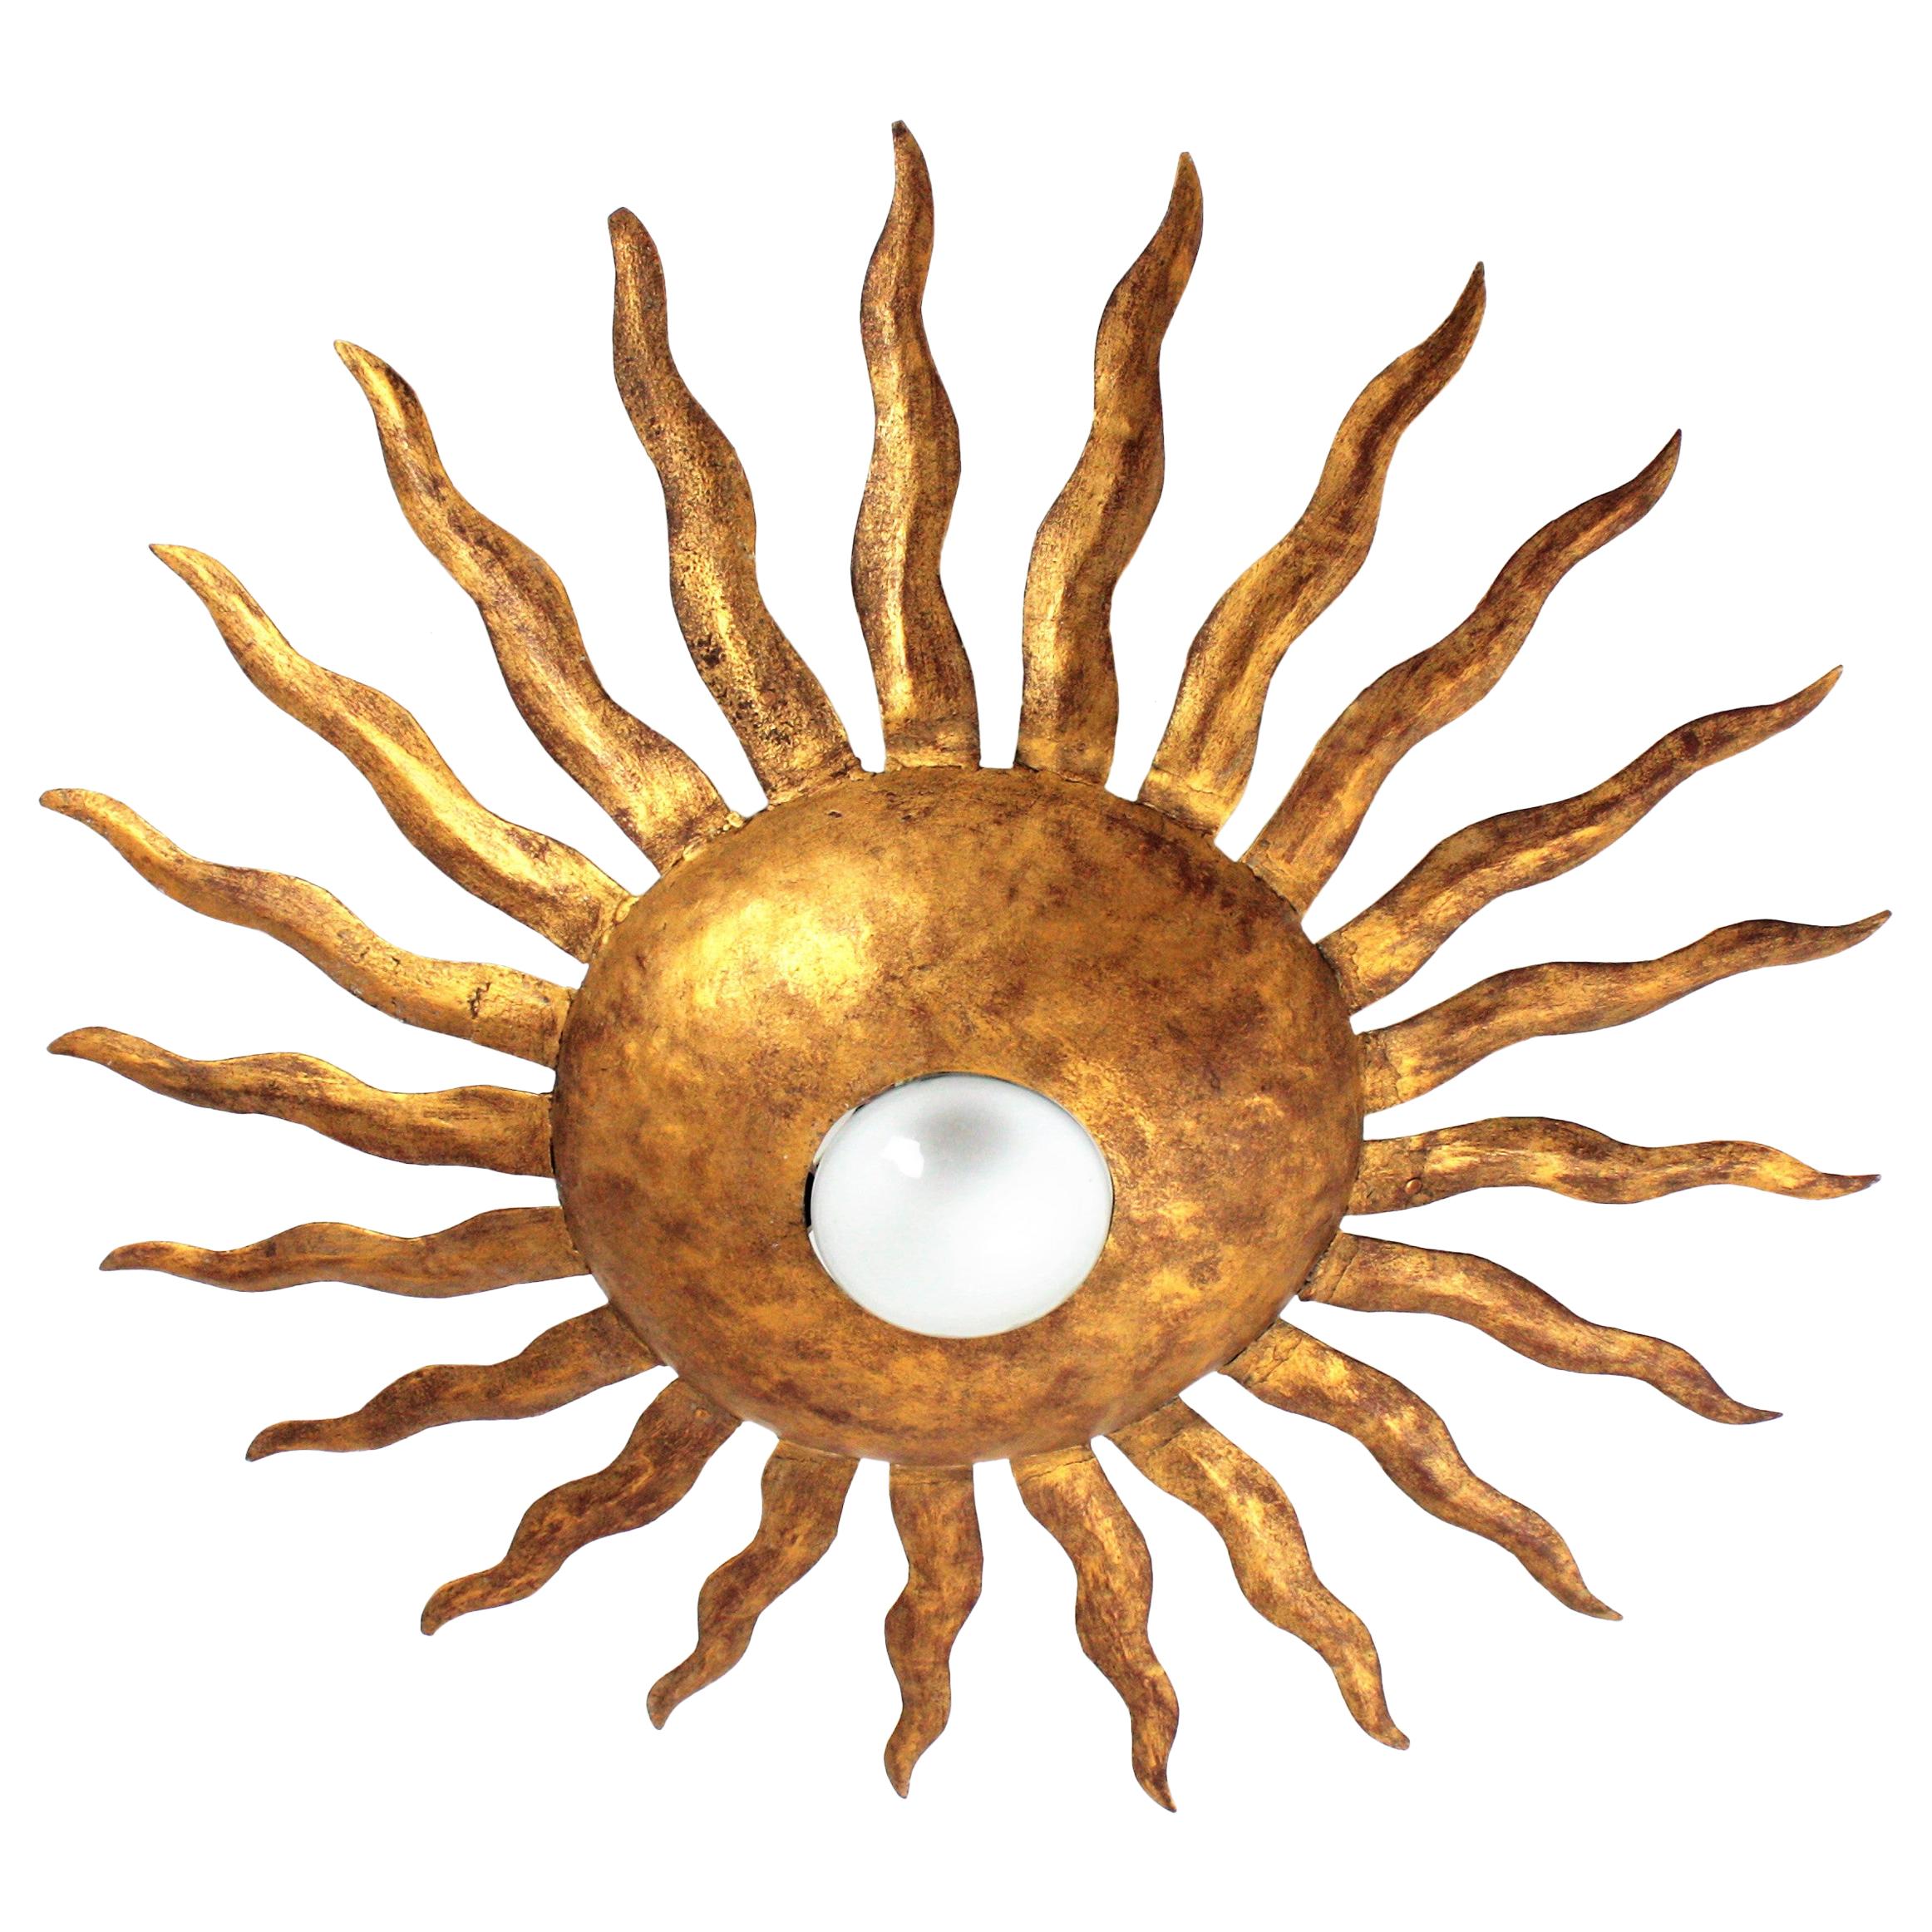 A beautiful sunburst ceiling light fixture or flushmount with gold leaf finish made in wrought iron, Spain, 1950-1960.
It has beautiful details of thick rays surrounding the central sphere with an exposed bulb.
It can be placed as a wall sconce or